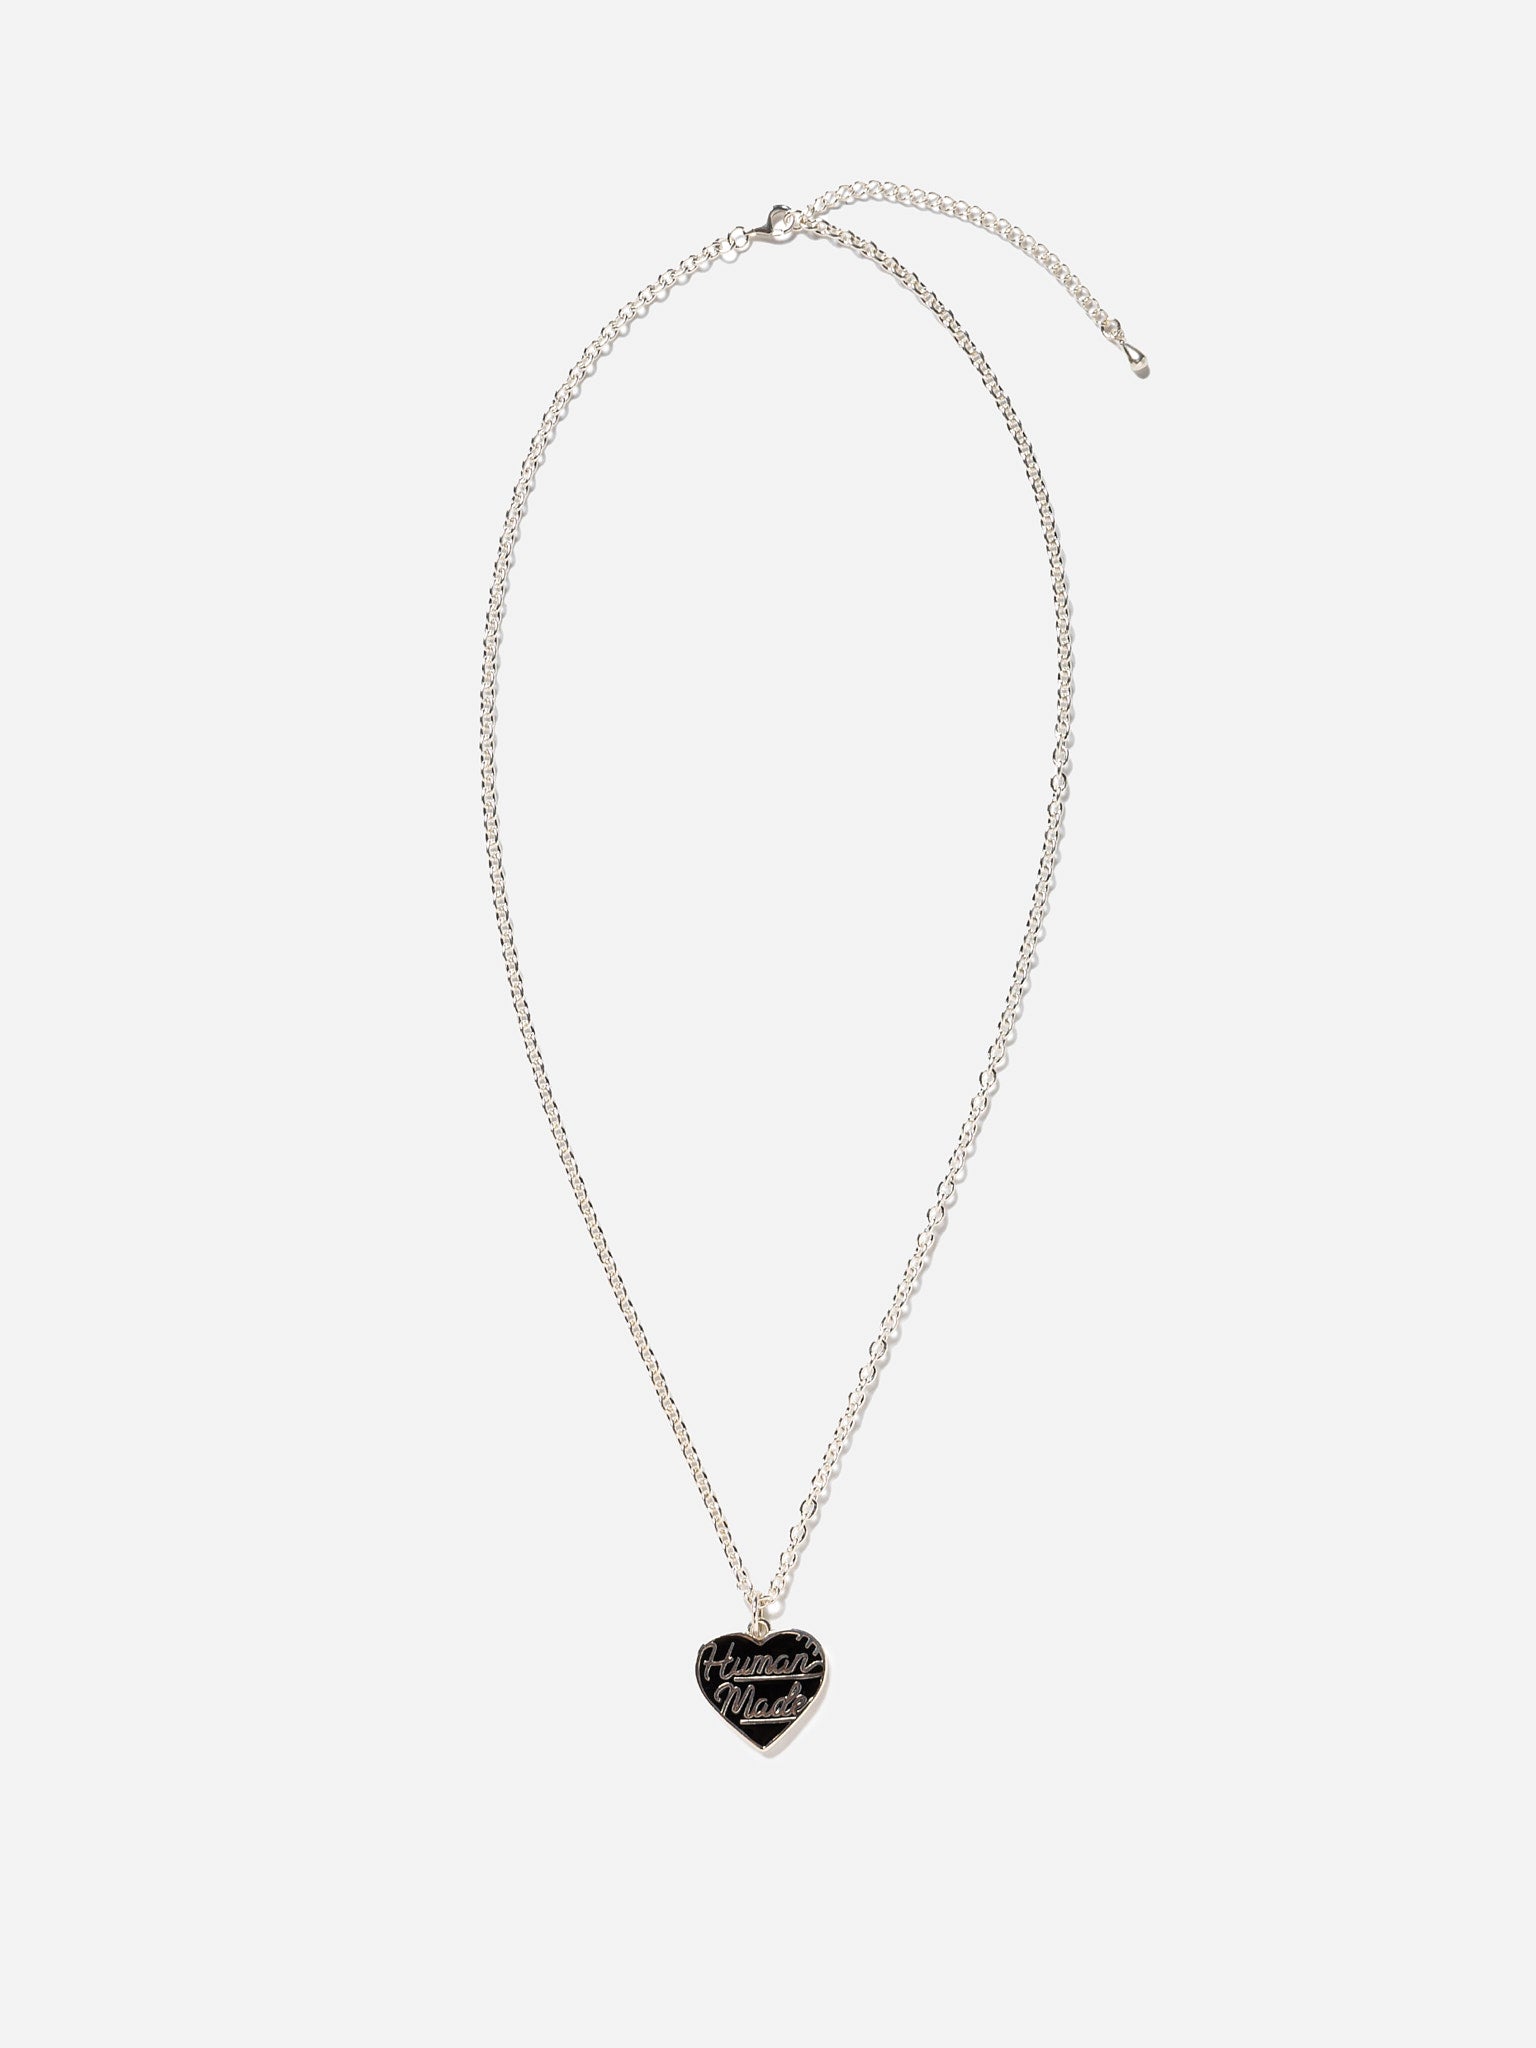 Human Made Heart Silver Necklace